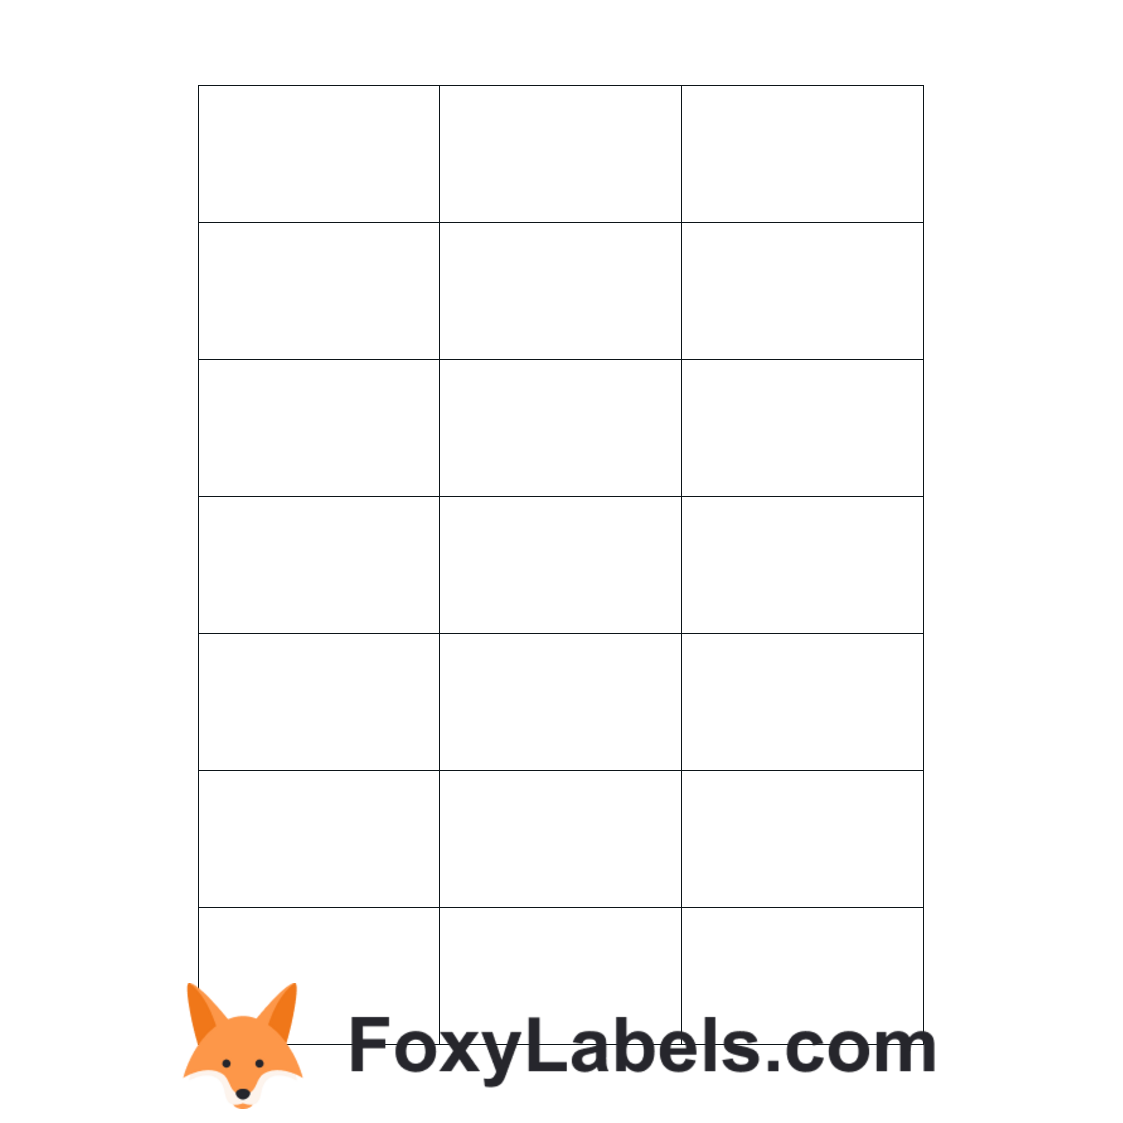 Avery-Zweckform 3670 label template for Google Docs